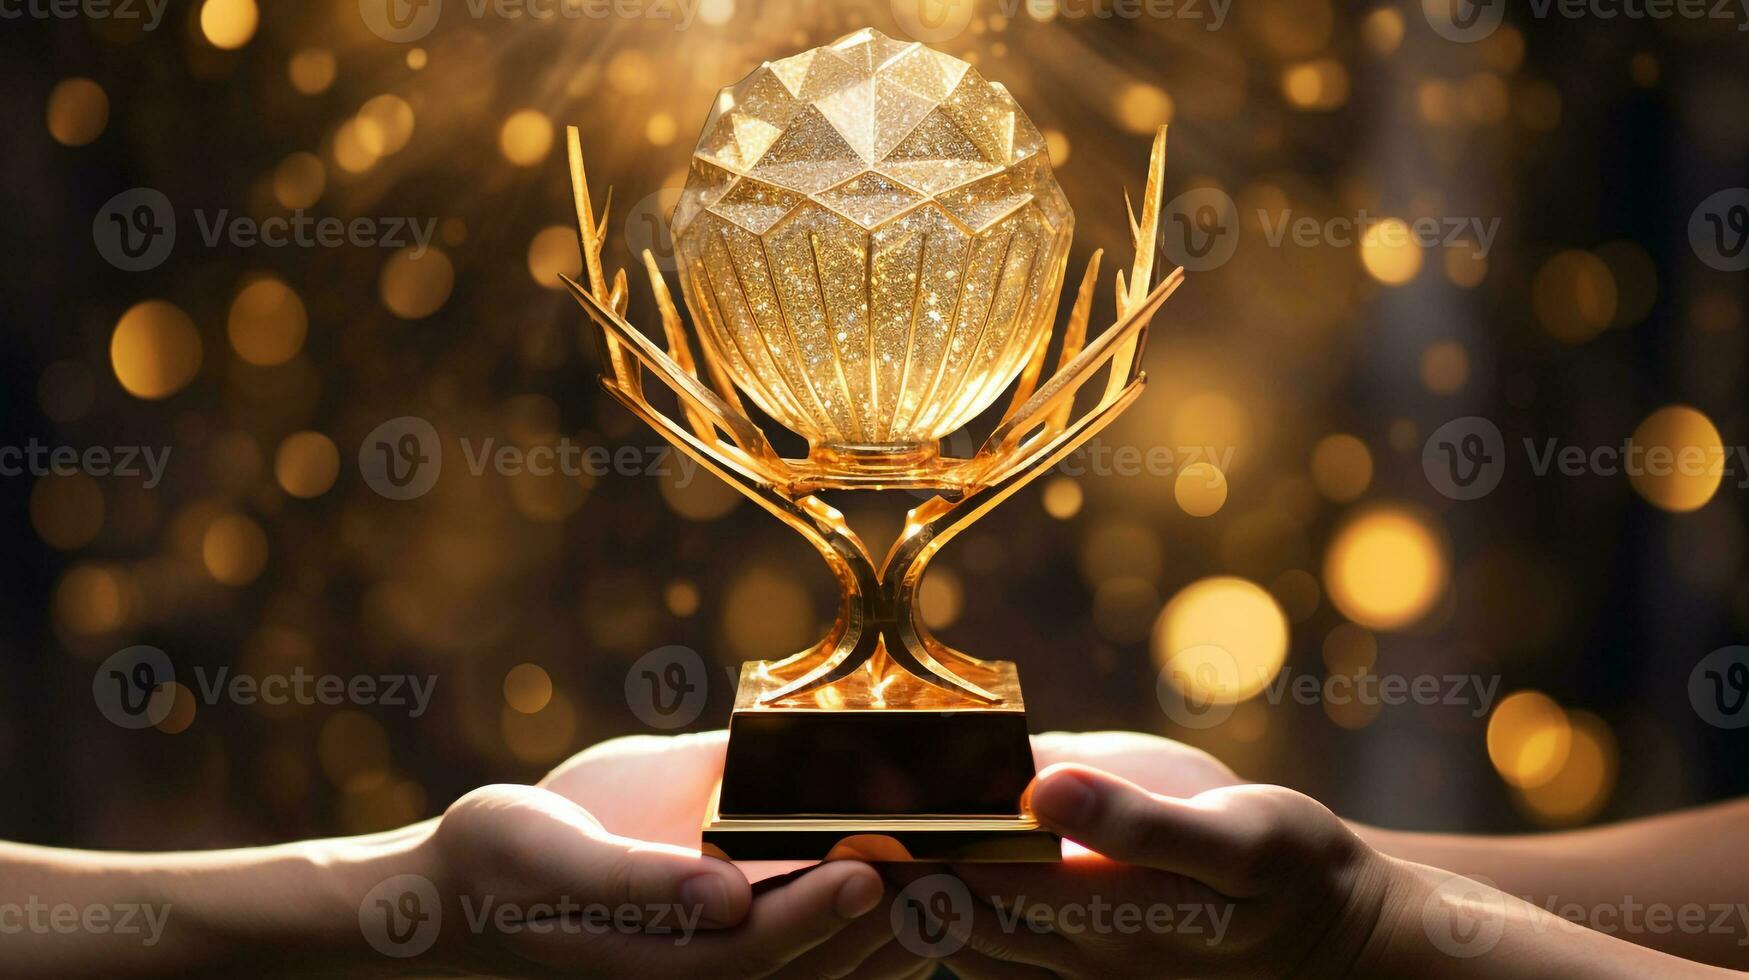 A persons hands are clasped together and they are holding a trophy, mental health images, photorealistic illustration photo